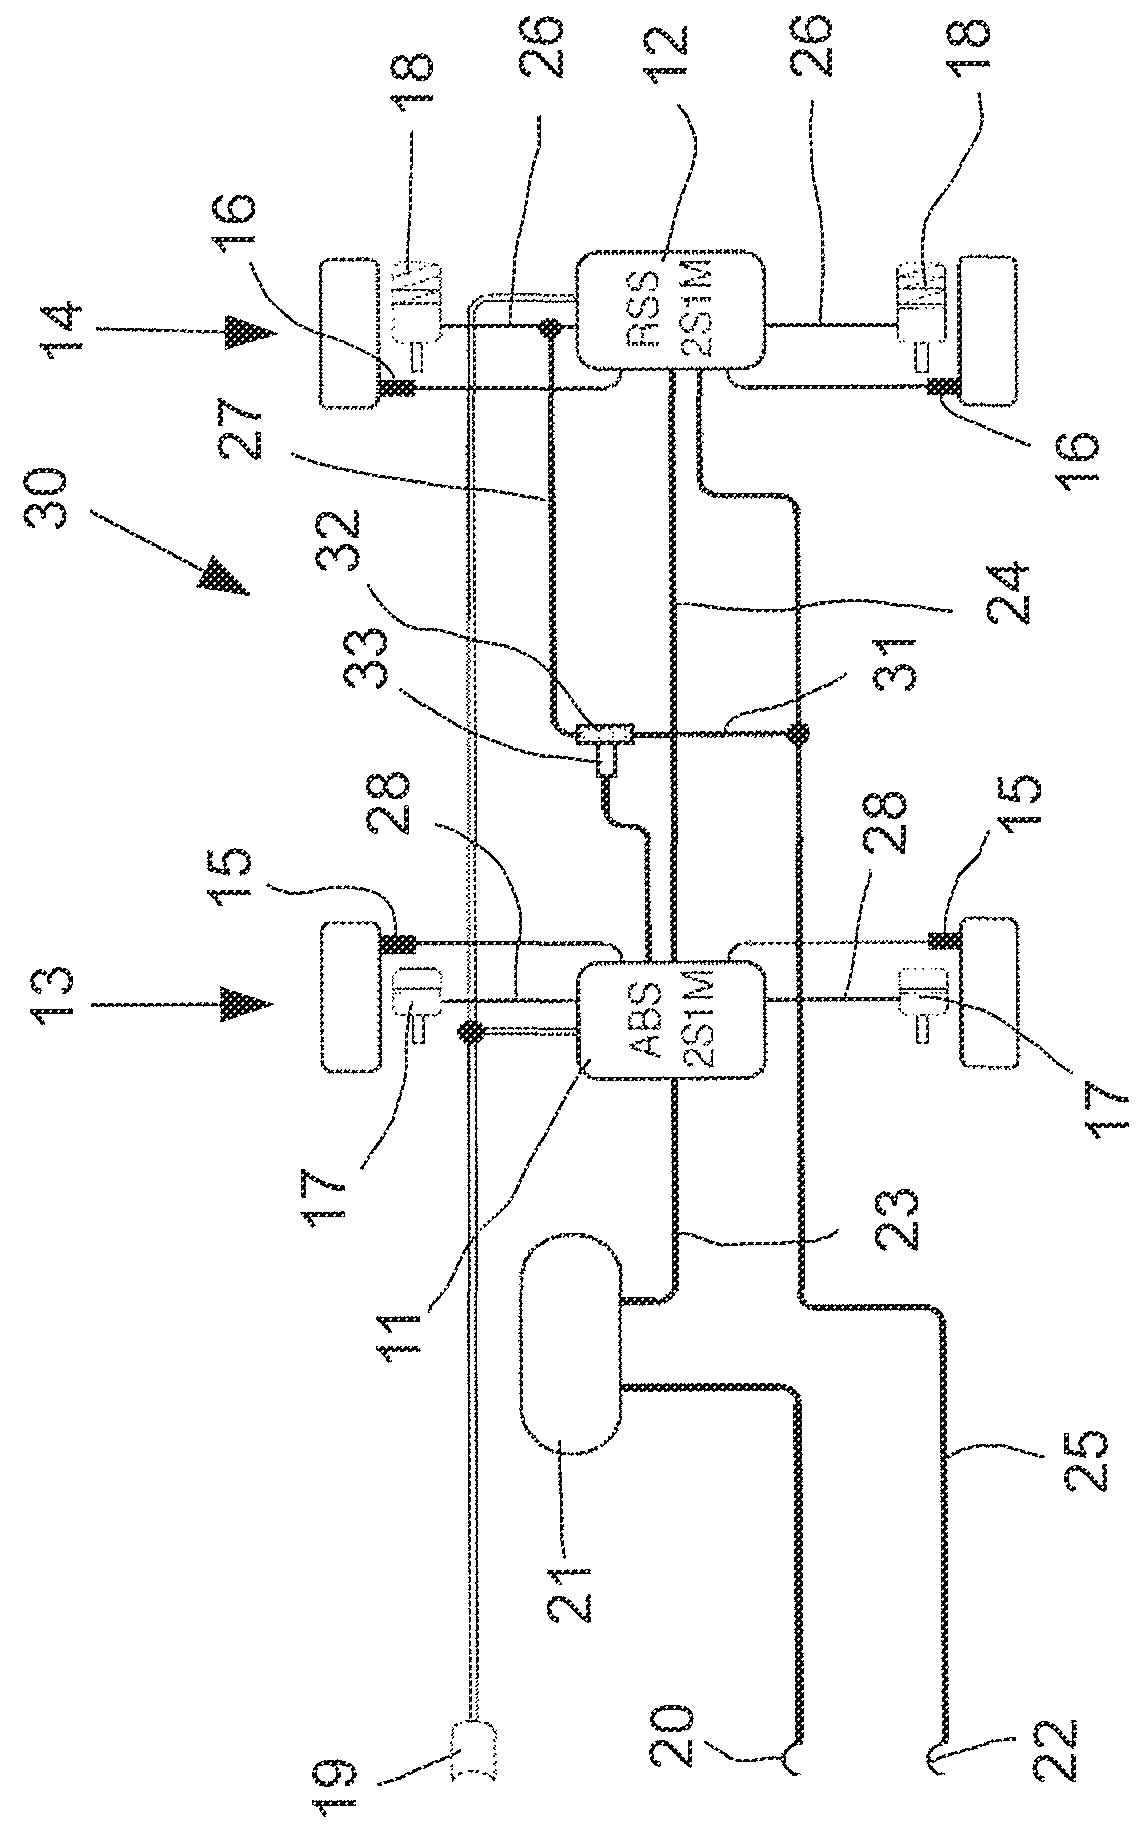 Electropneumatic brake system for a towed vehicle